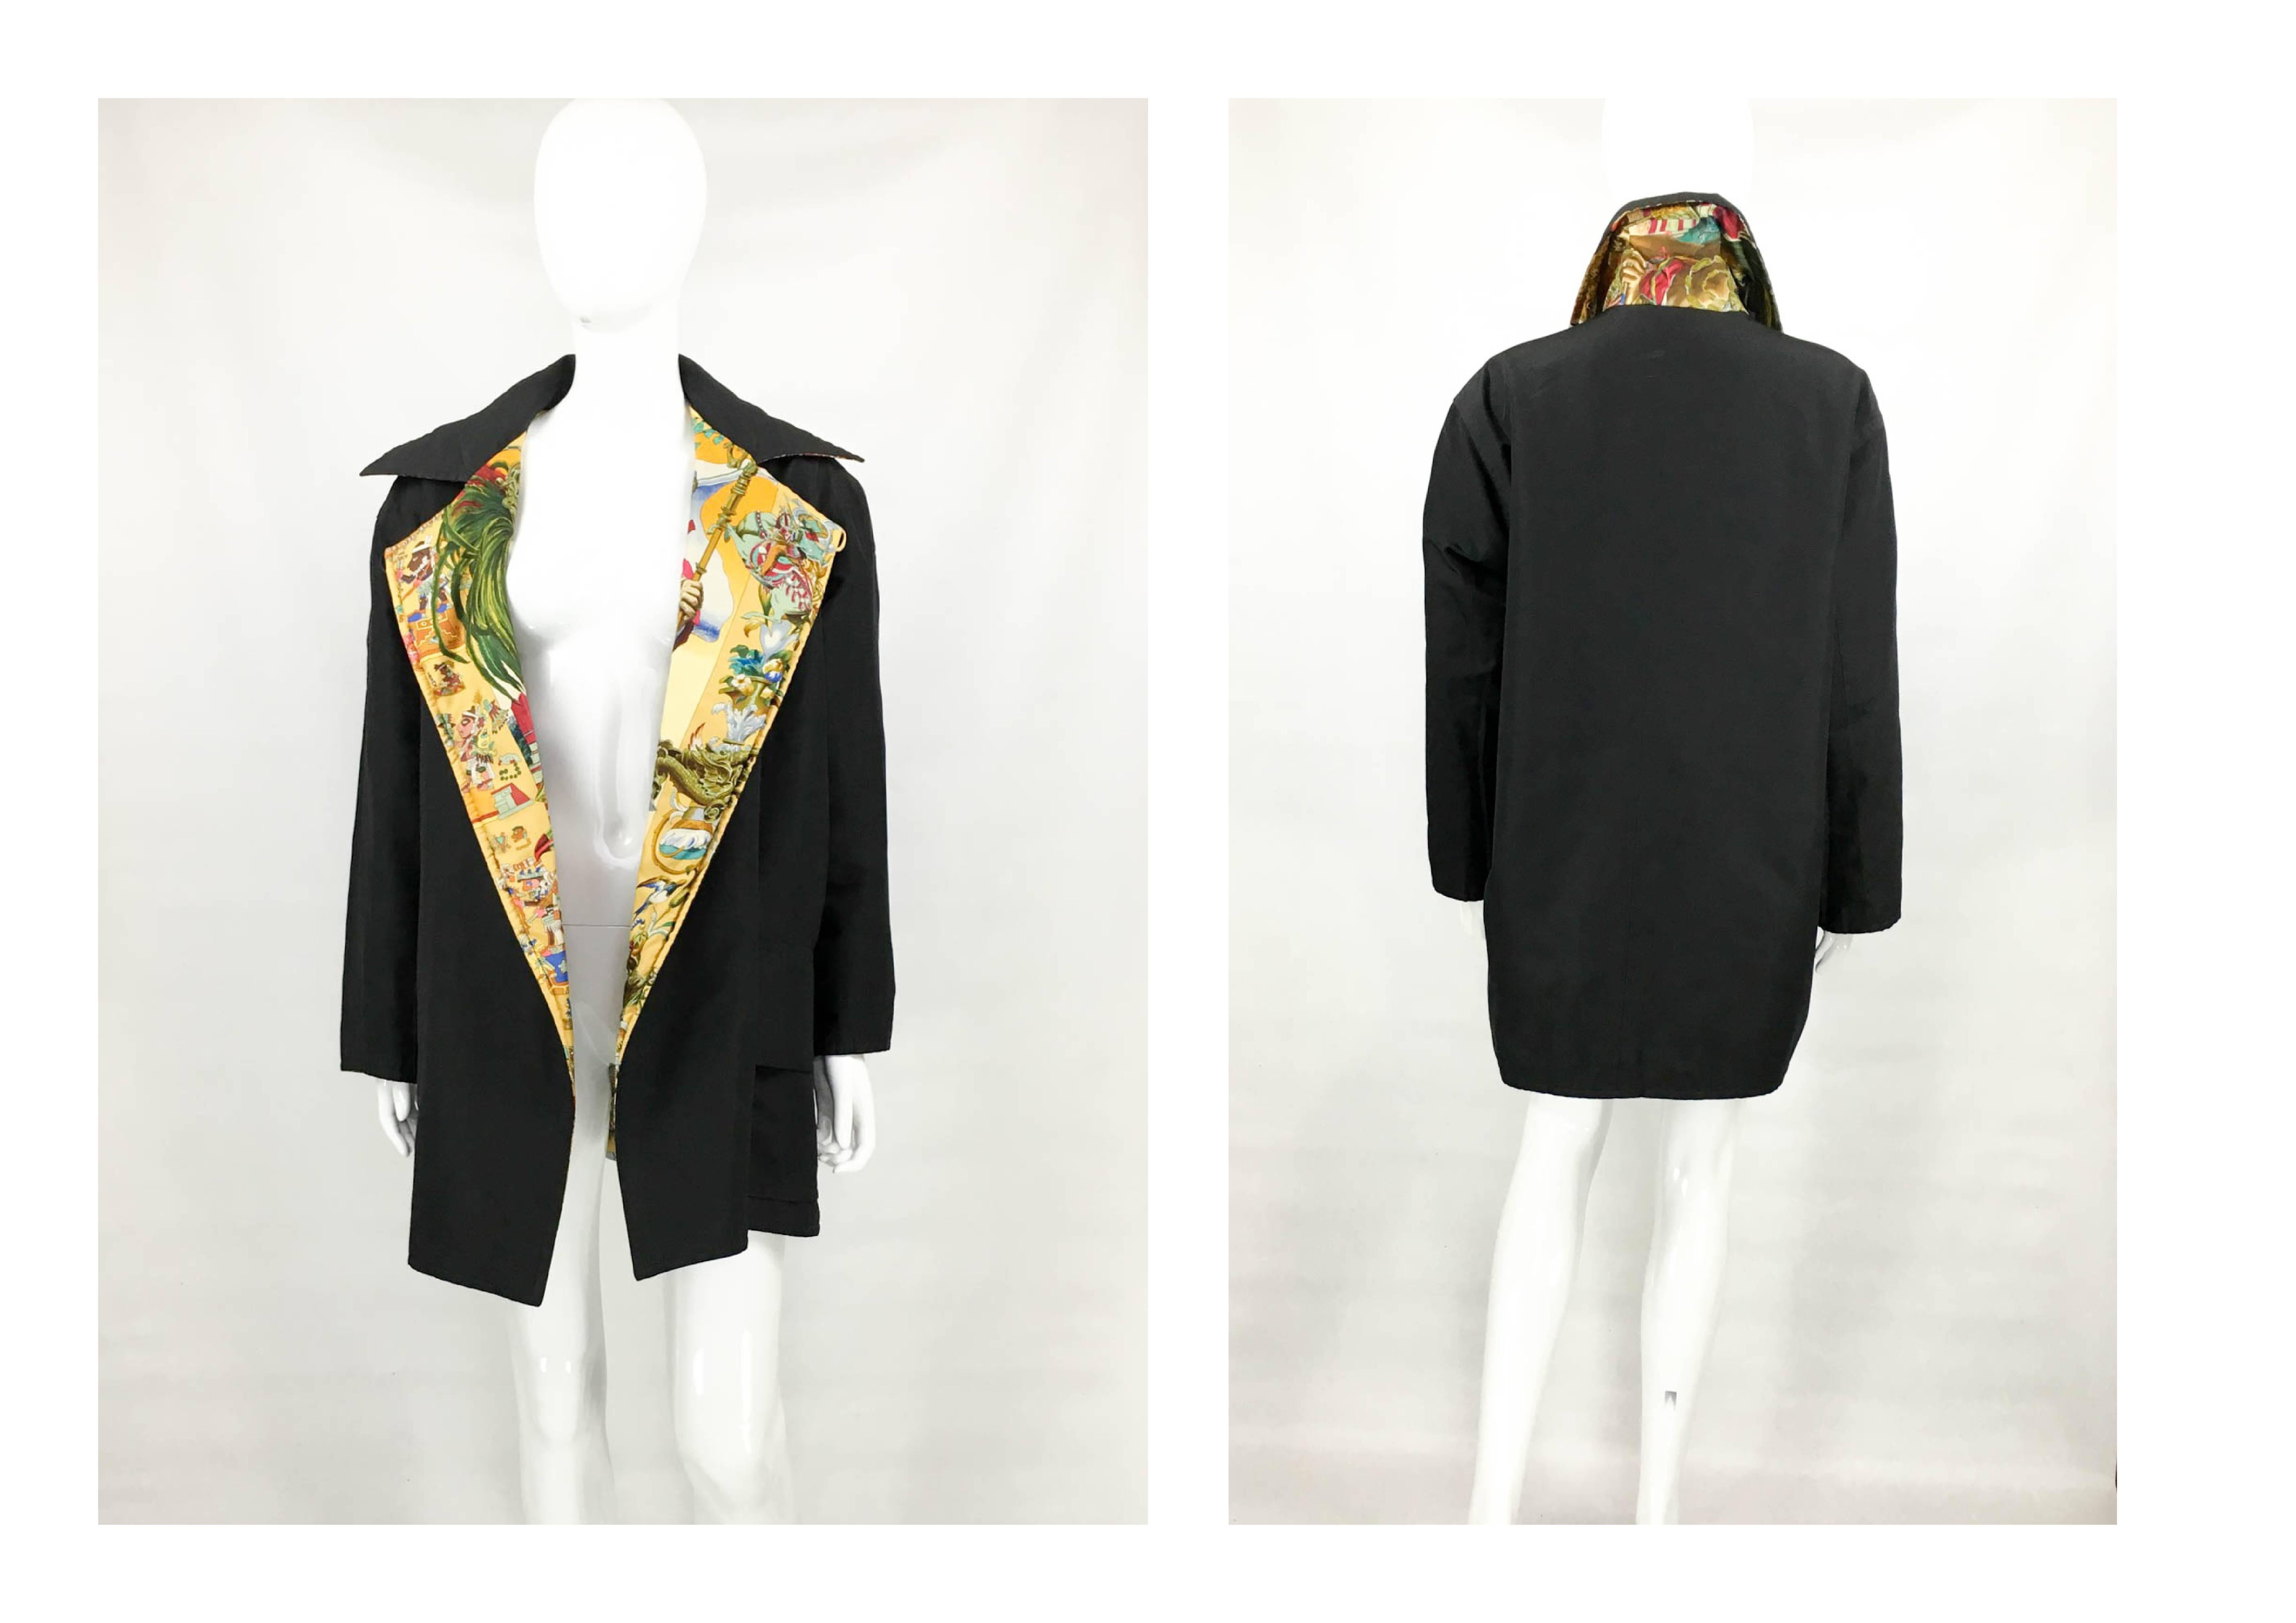 Vintage Hermes Reversible Puffer Jacket. This absolutely
stunning Hermes reversible jacket is black on one side and features the Les
Ameriques print on the other. Designed by Kermit Oliver, this print was
released in 1994 in celebration of the